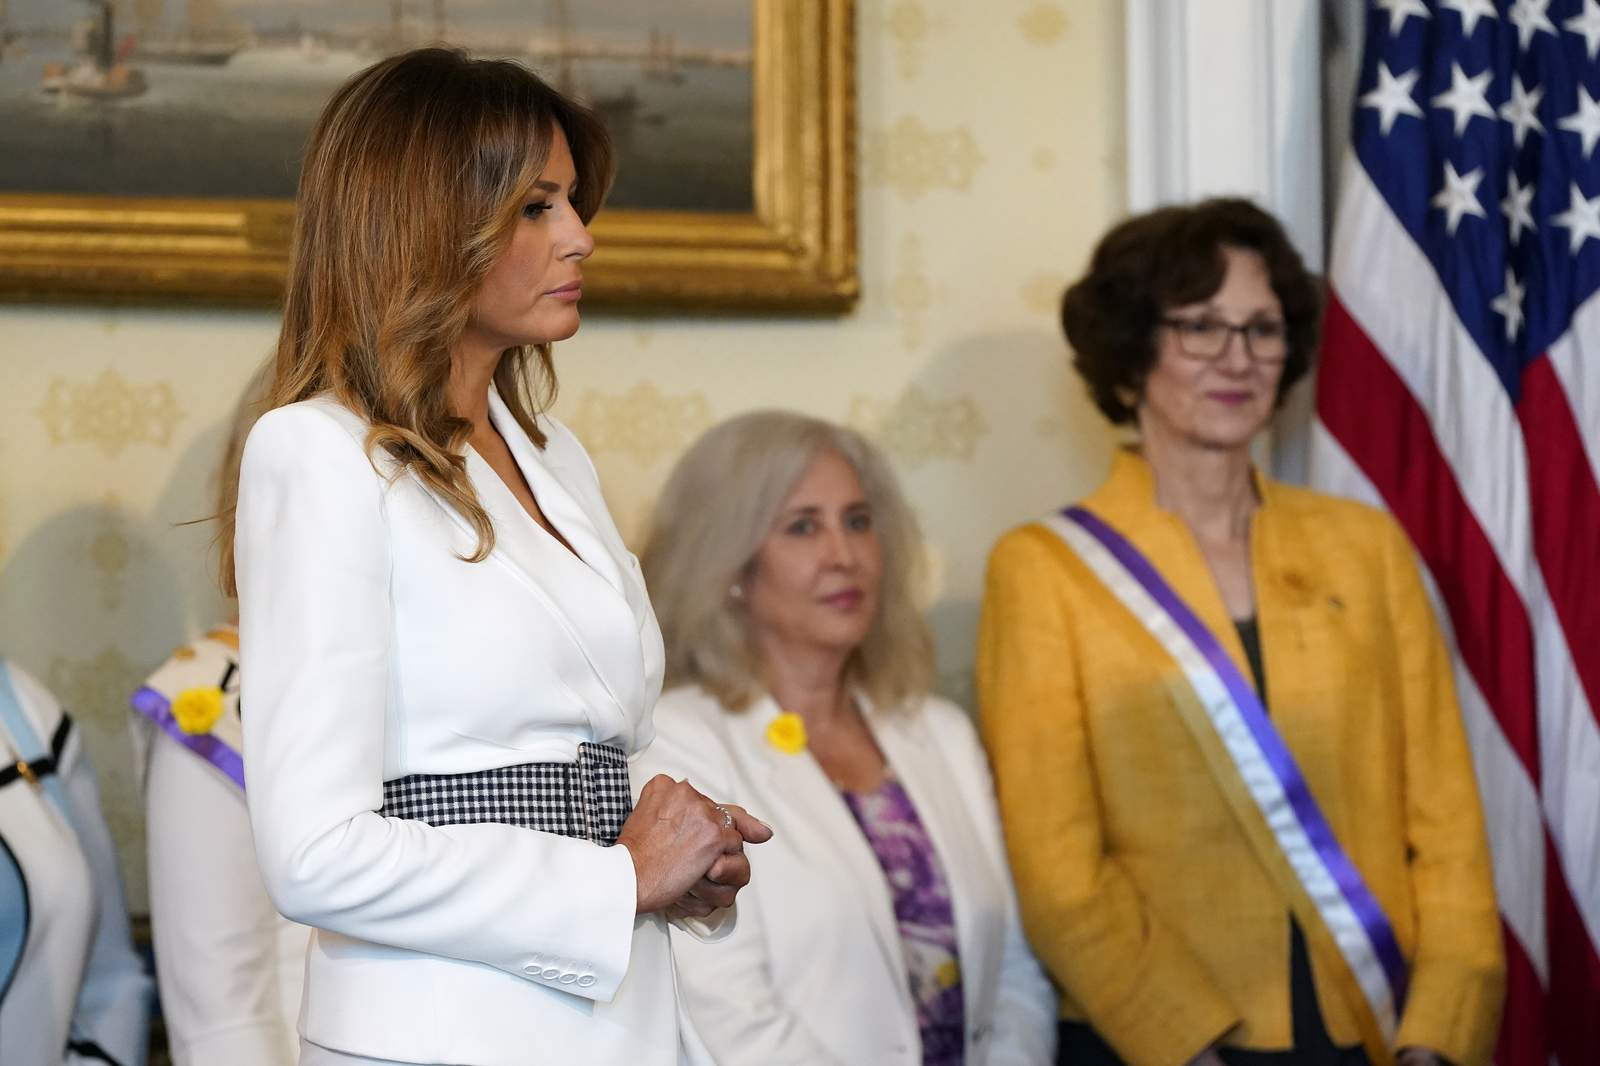 First lady opens student art exhibit on women's suffrage